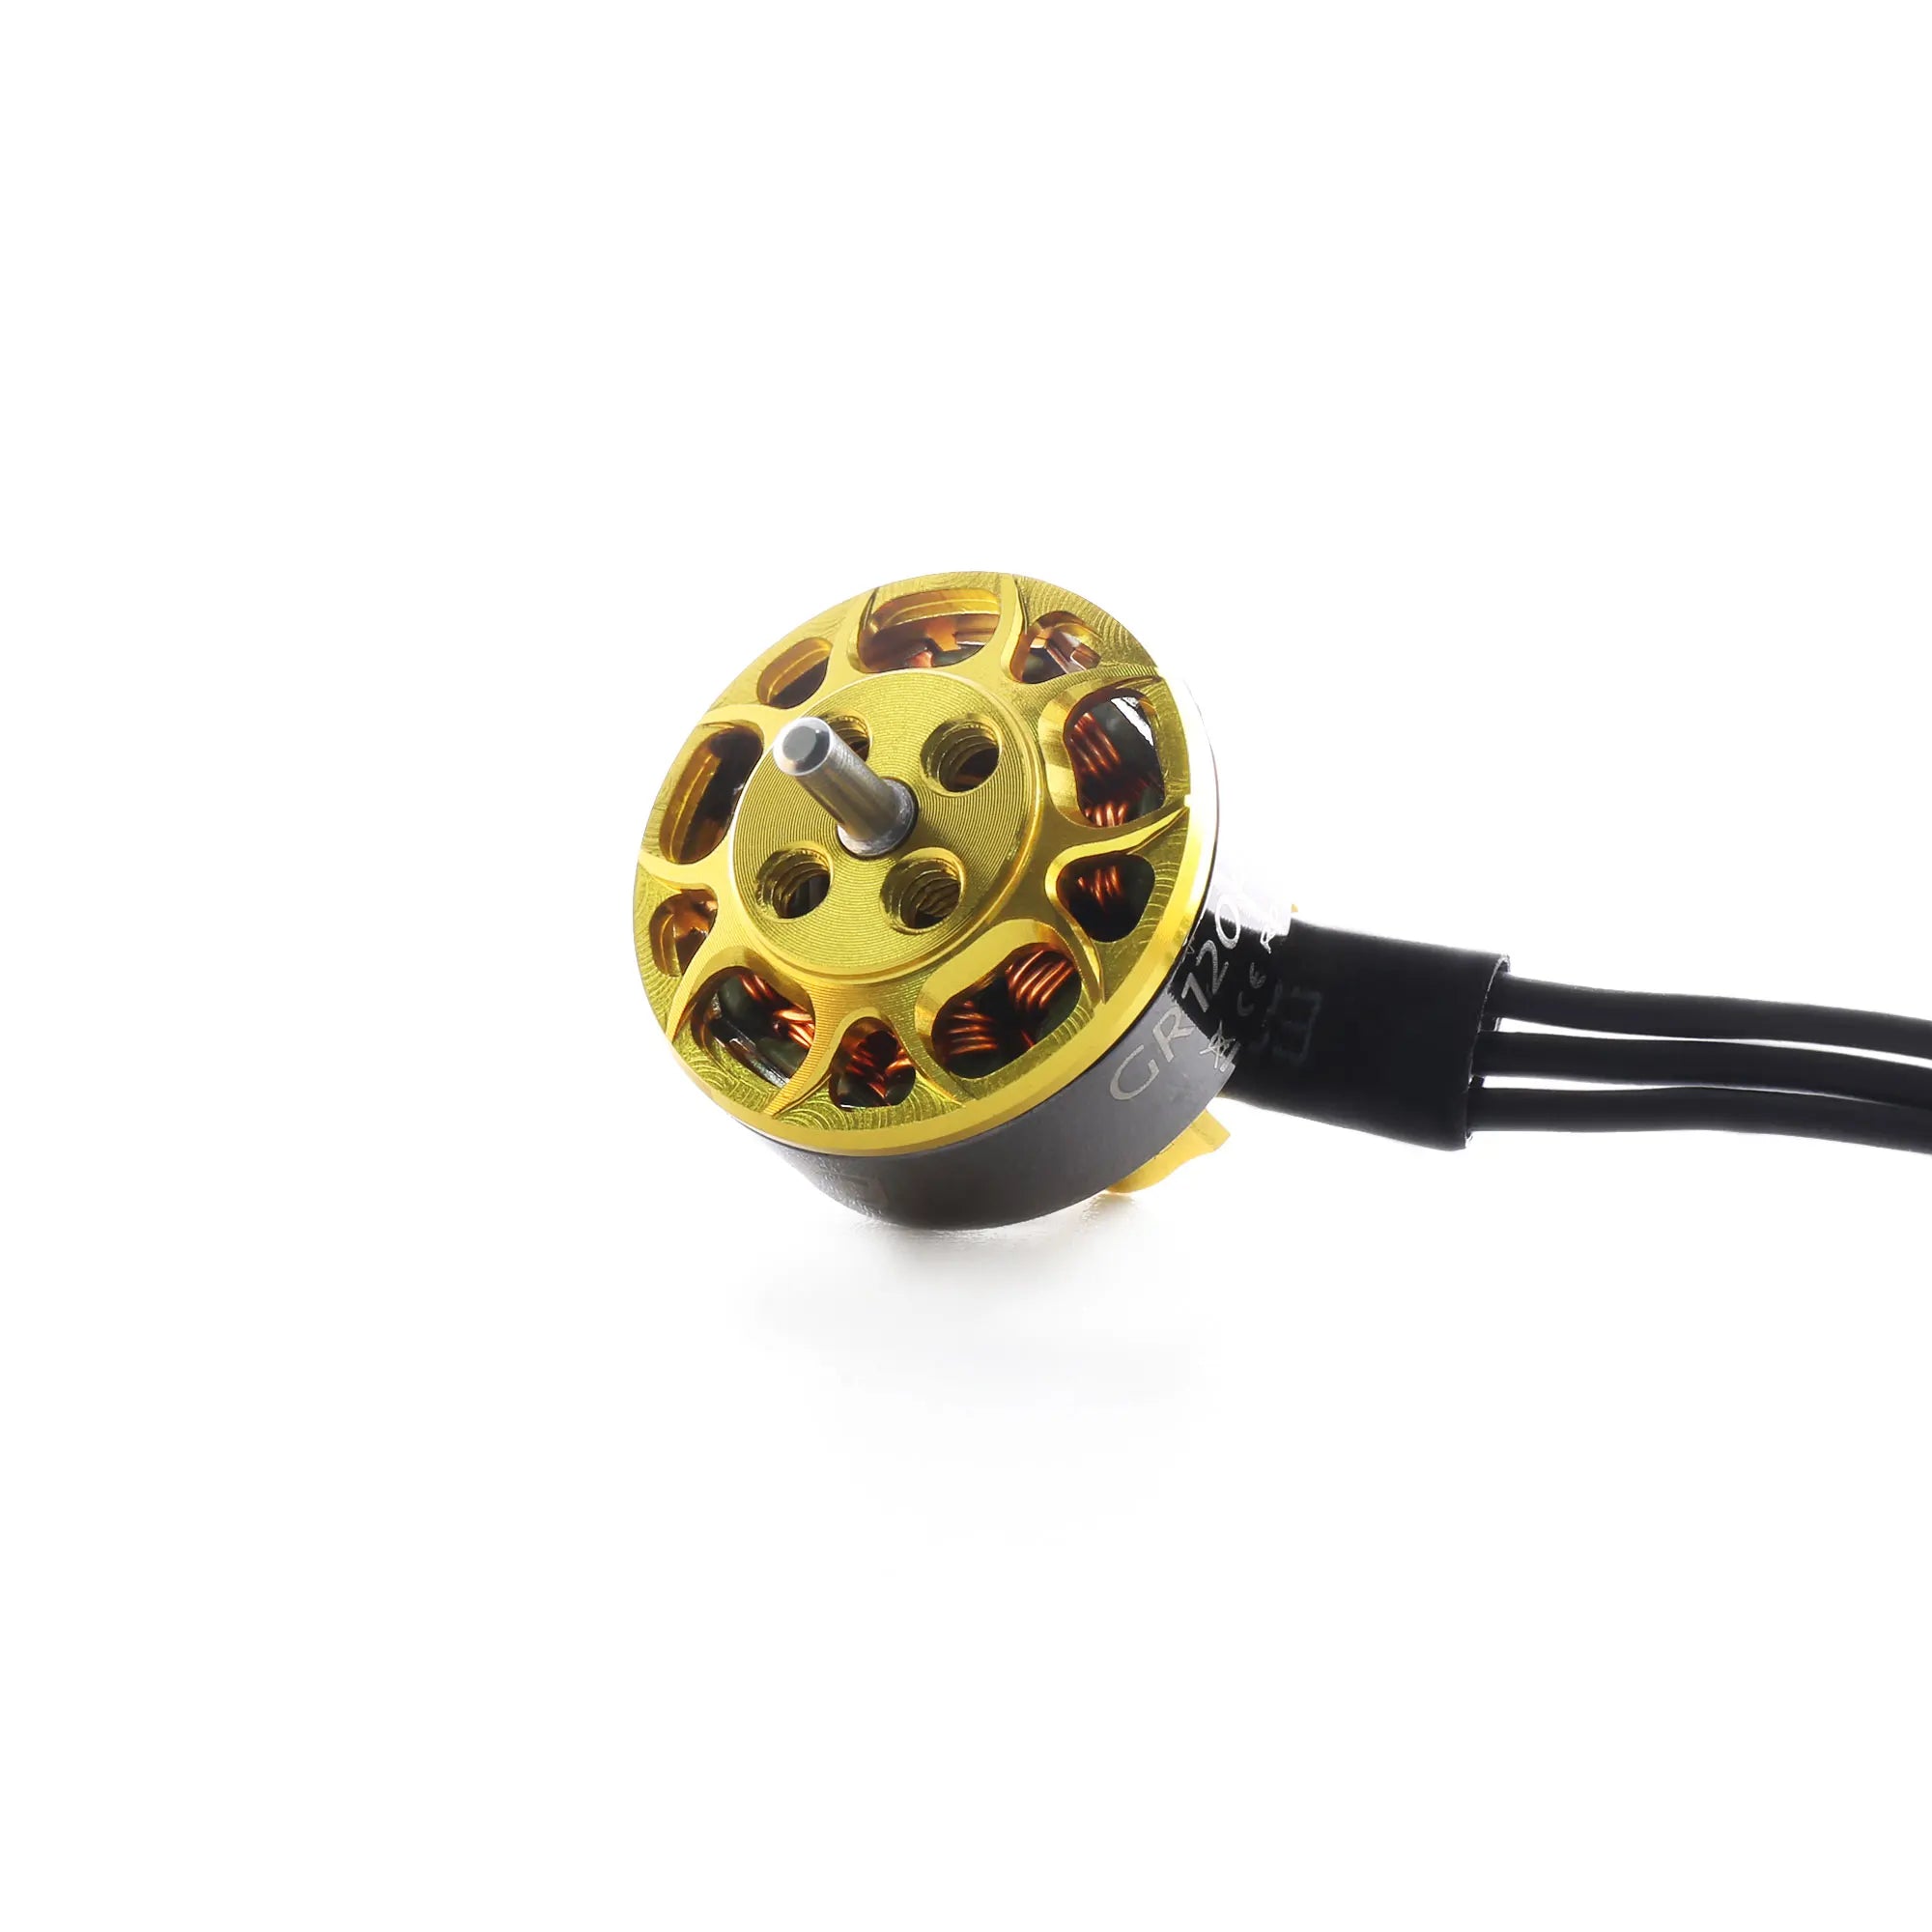 GEPRC GR1204 5000kv FPV Motor, Compatible with 105mm-110mm RC Drone(Whoop Drone and